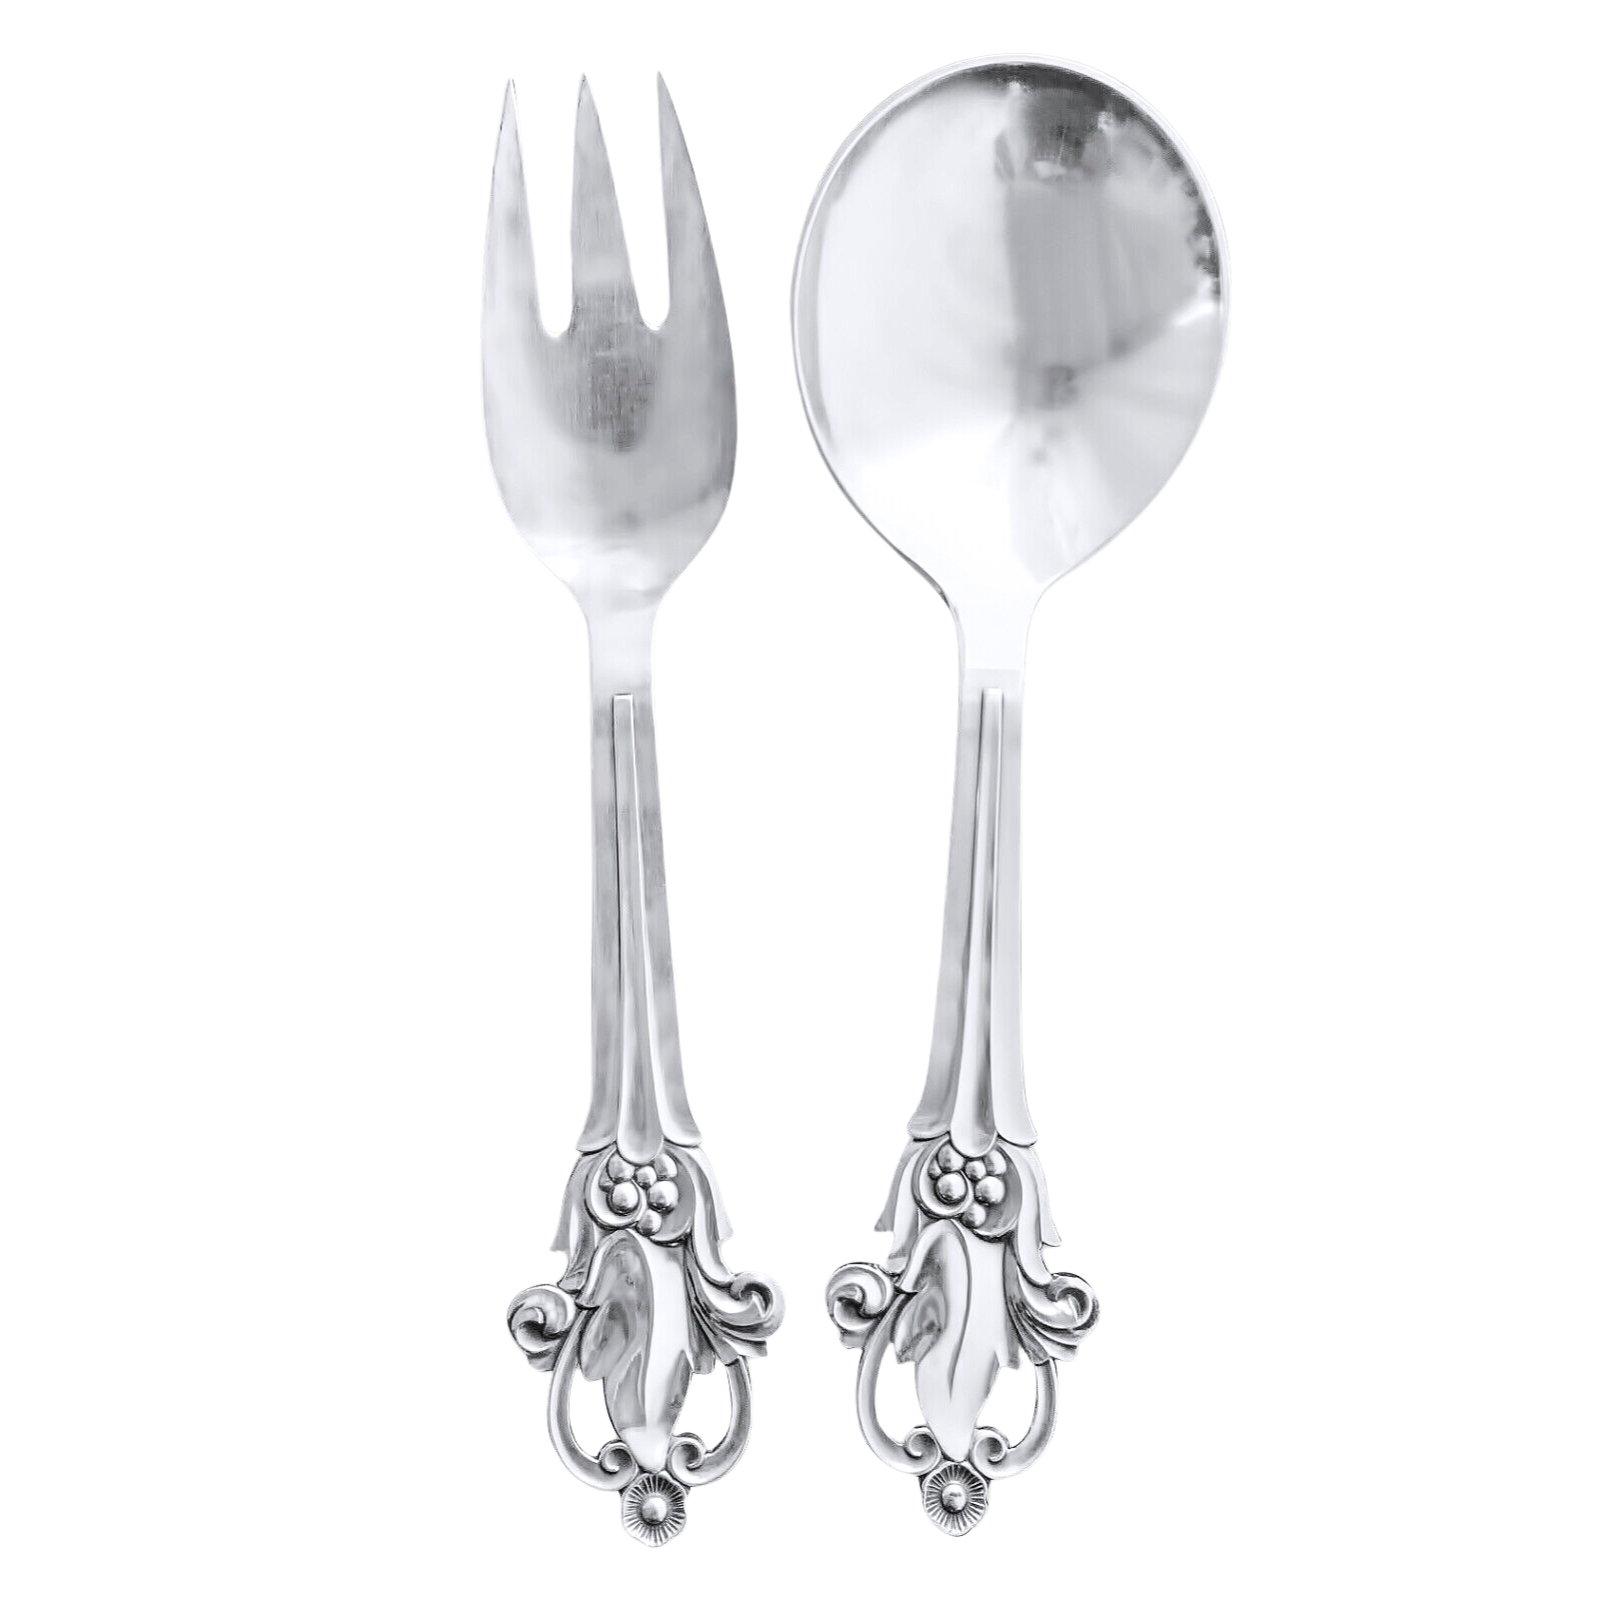 Louis XV (Sterling, 1891) Solid Asparagus Server by Whiting Manf Co